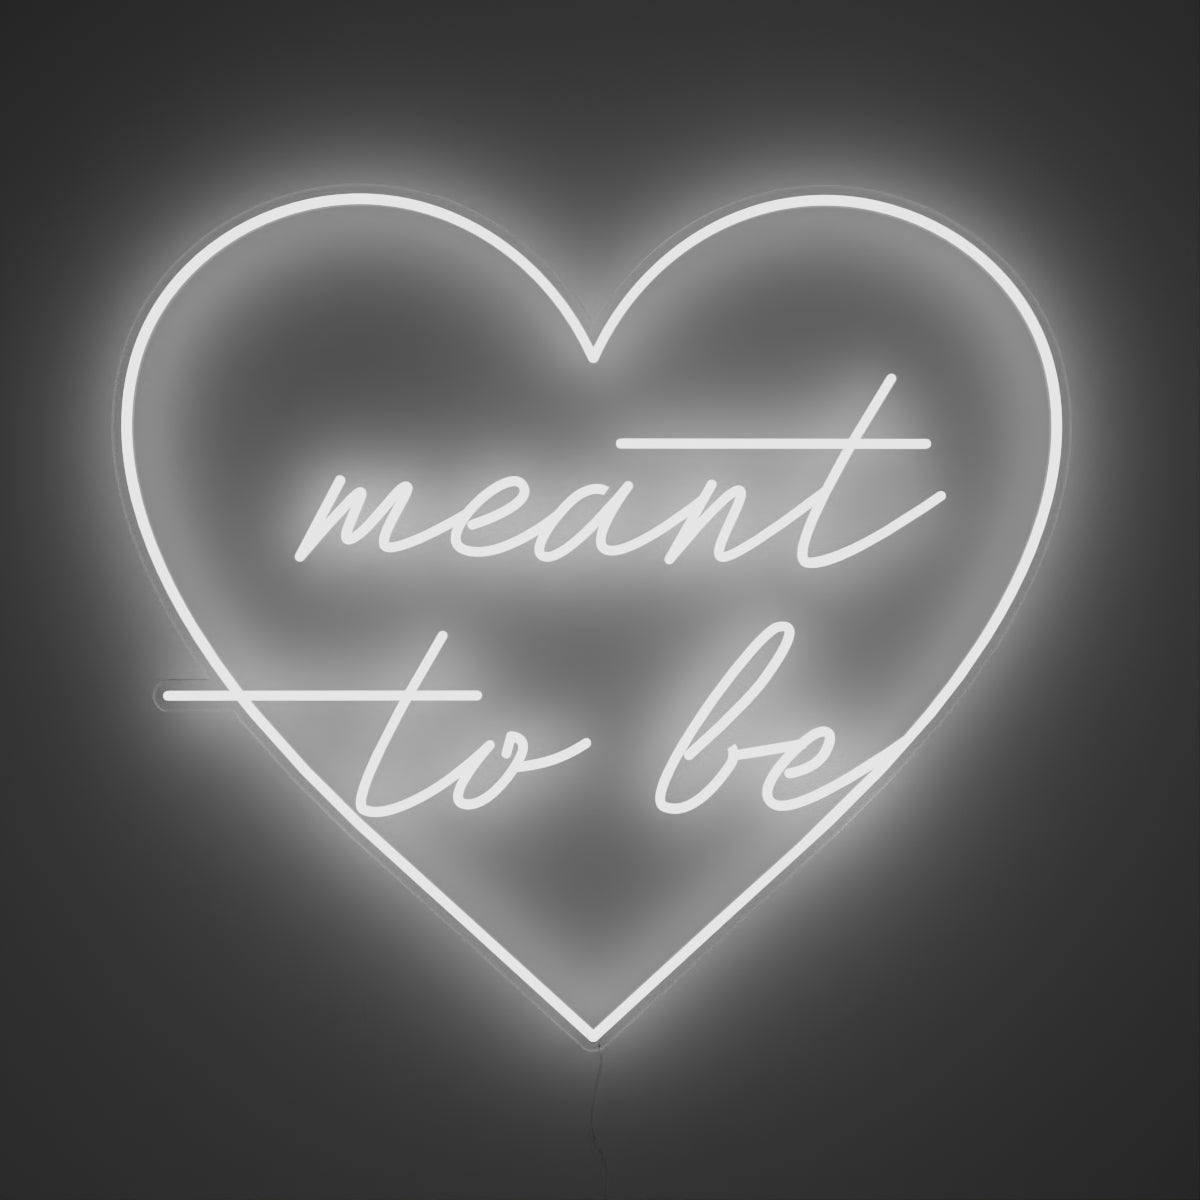 Meant to be by Melissa - Neon Tabela - Neonbir